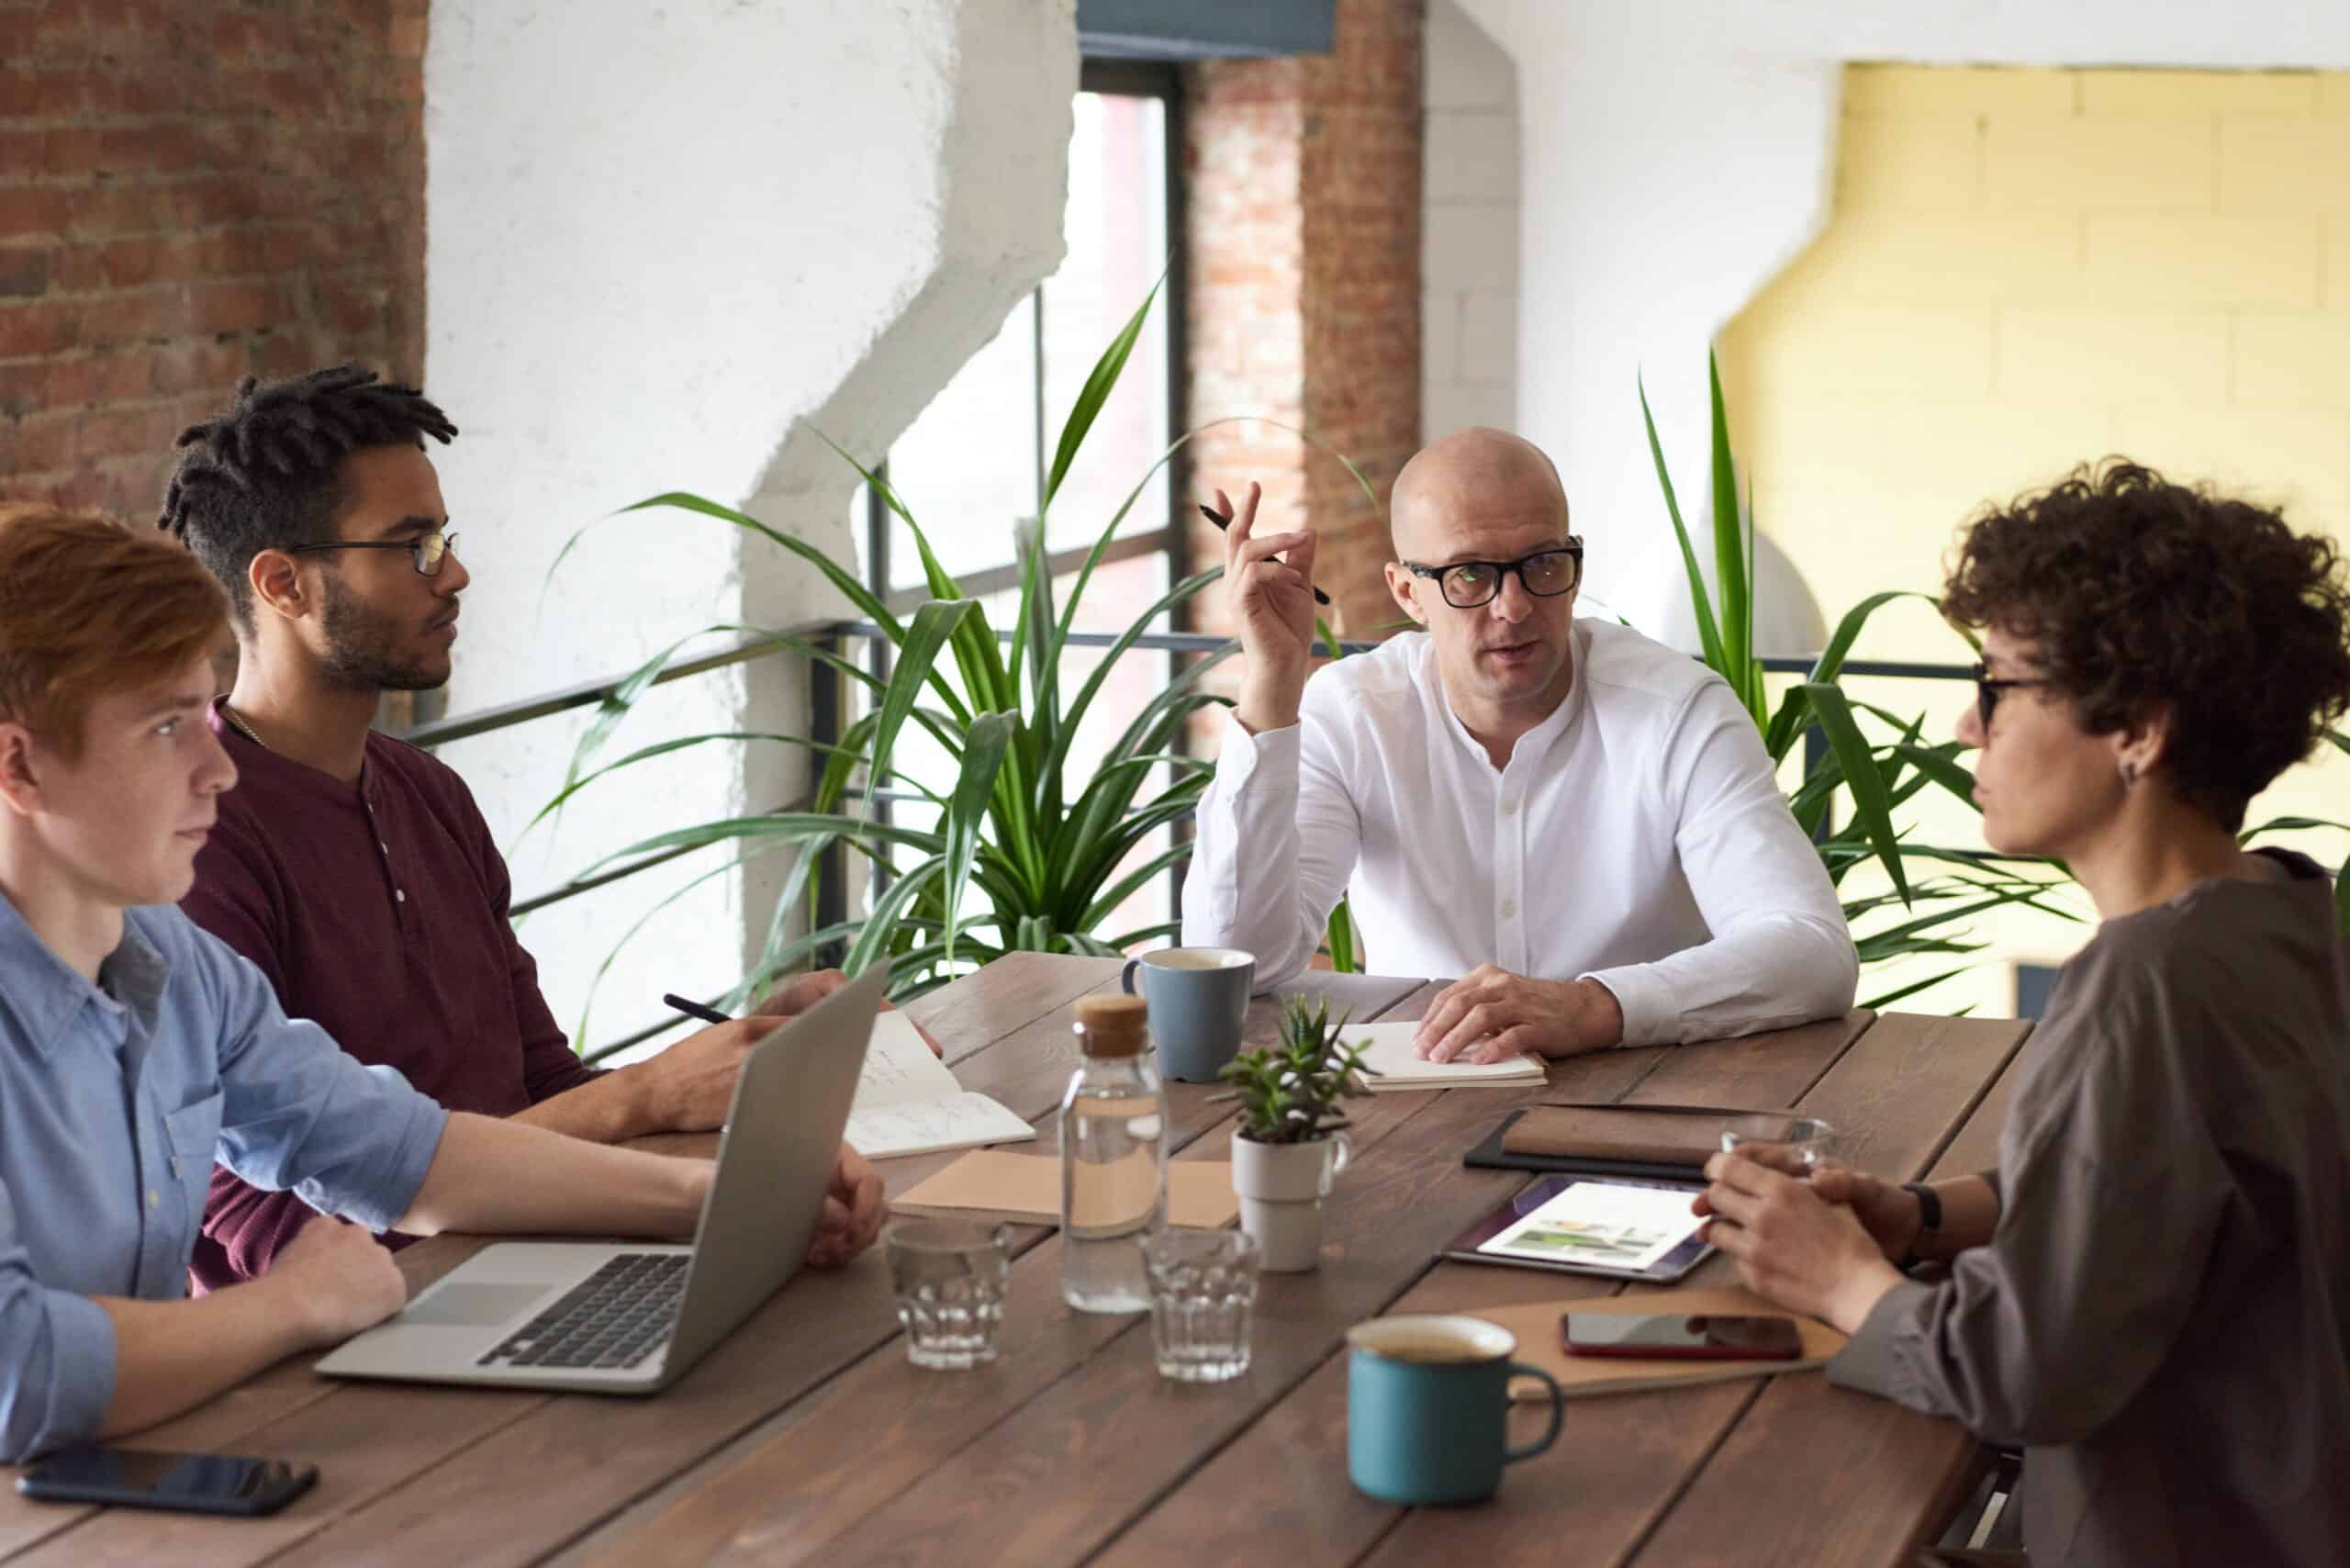 Four coworkers sit around a table discussing data privacy needs during a meeting